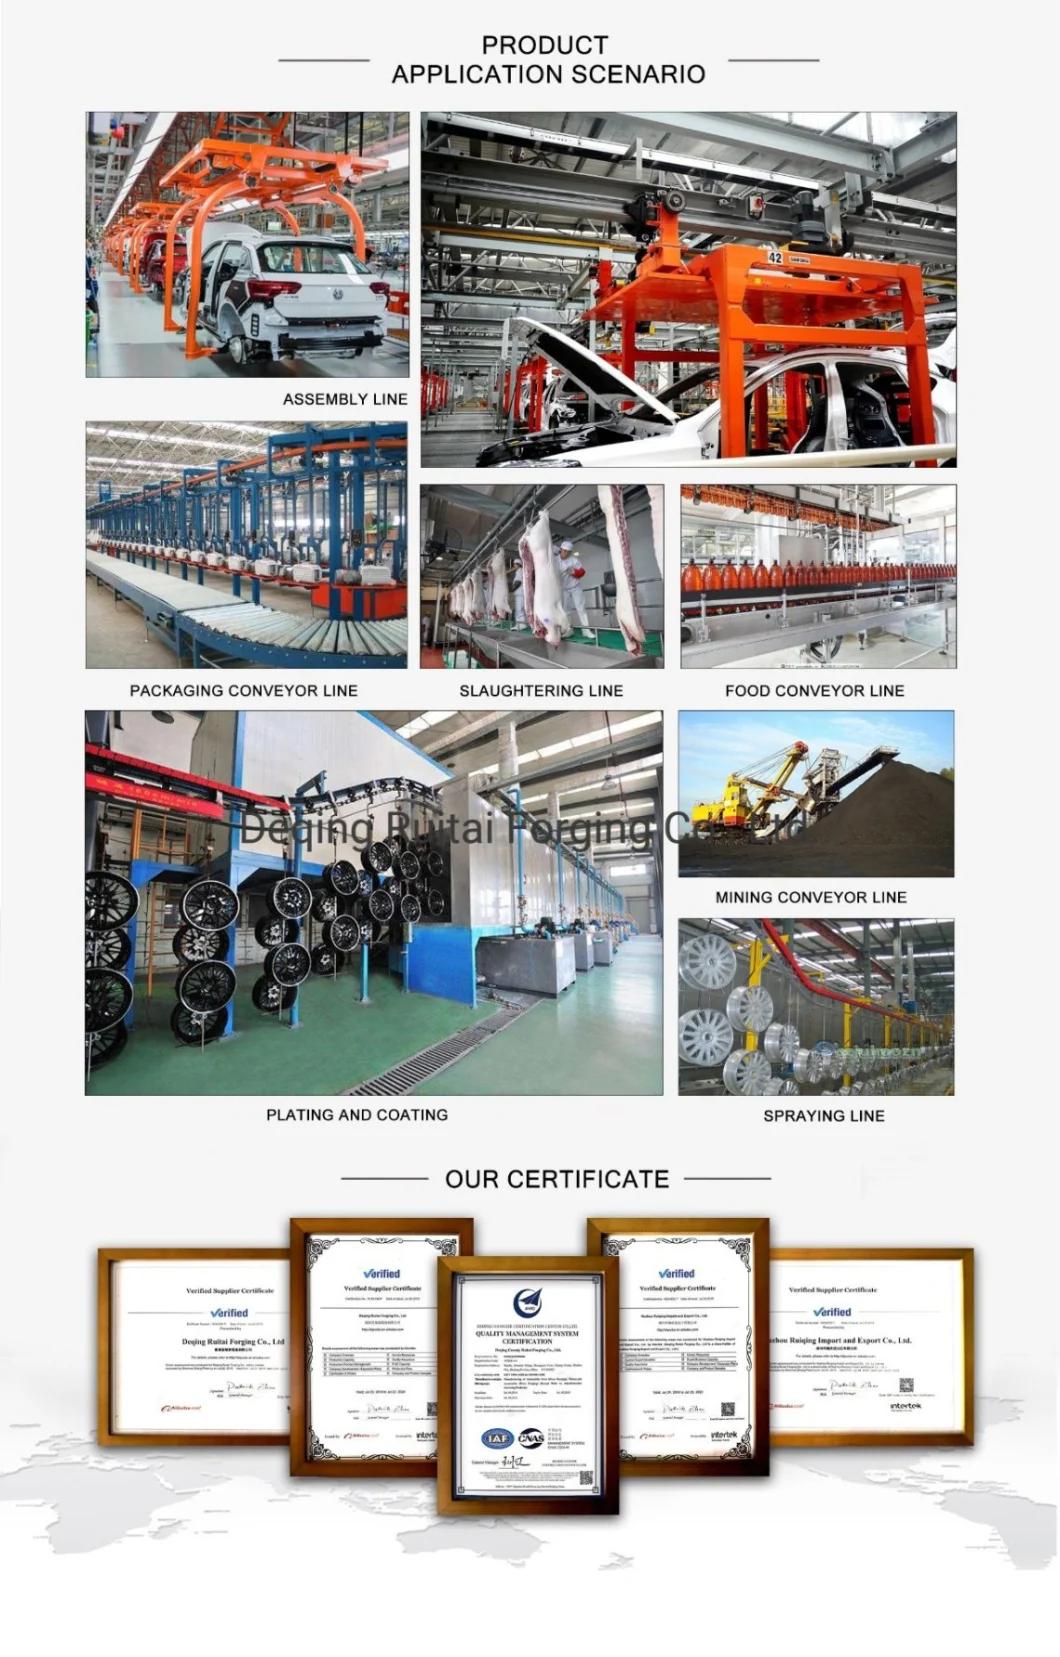 Professional Manufacturer of Drop Forged Monorail Overhead Conveyor Chain and Trolley for Poultry Conveyor Line X348